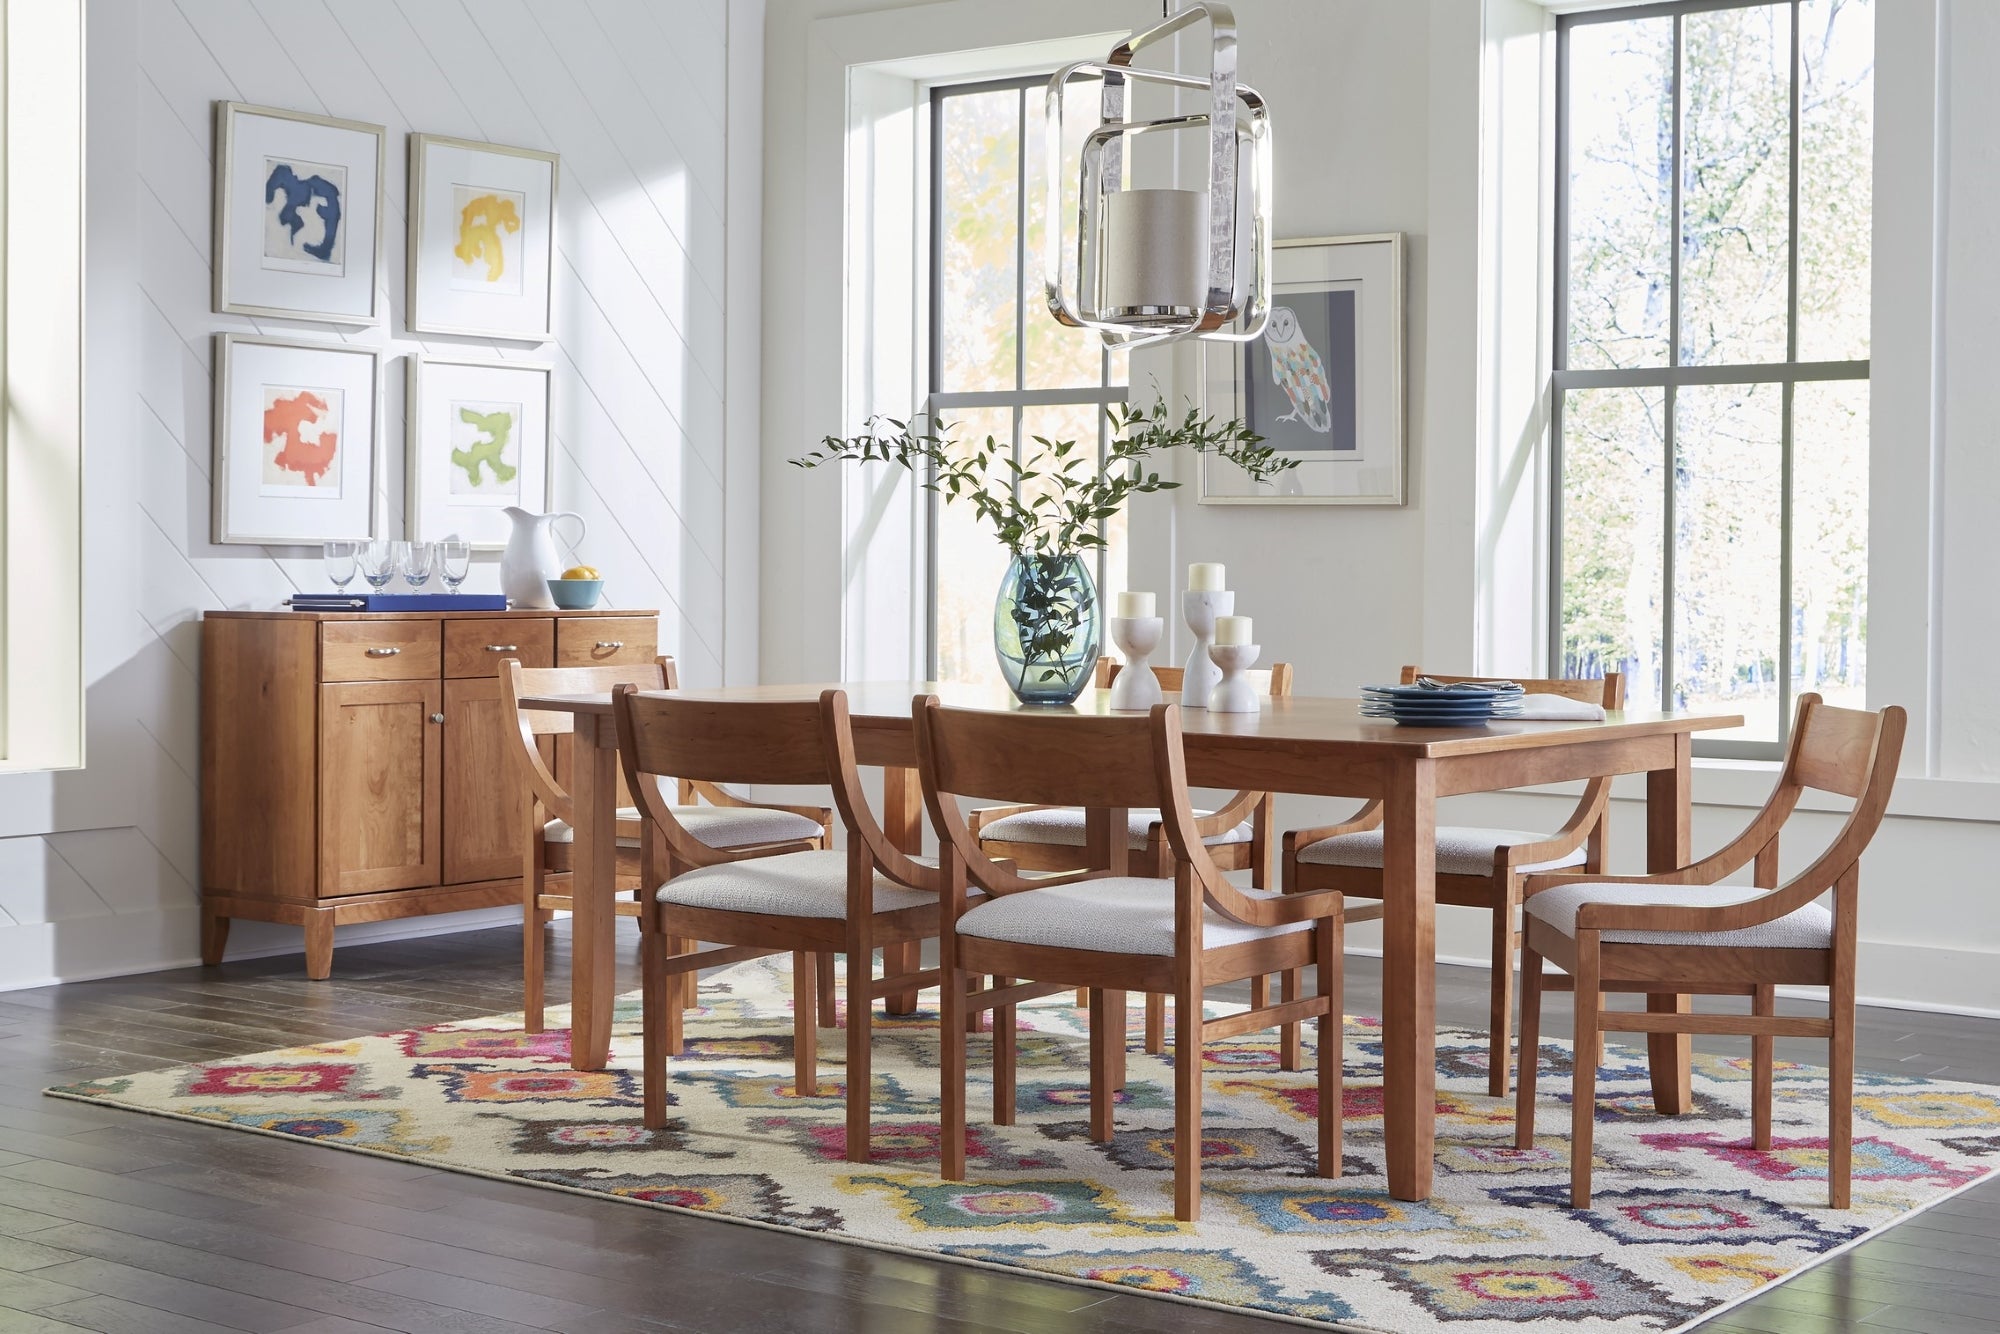 Large medium wood dining table surrounded by matching dining chairs and flanked by a matching medium wood credenza